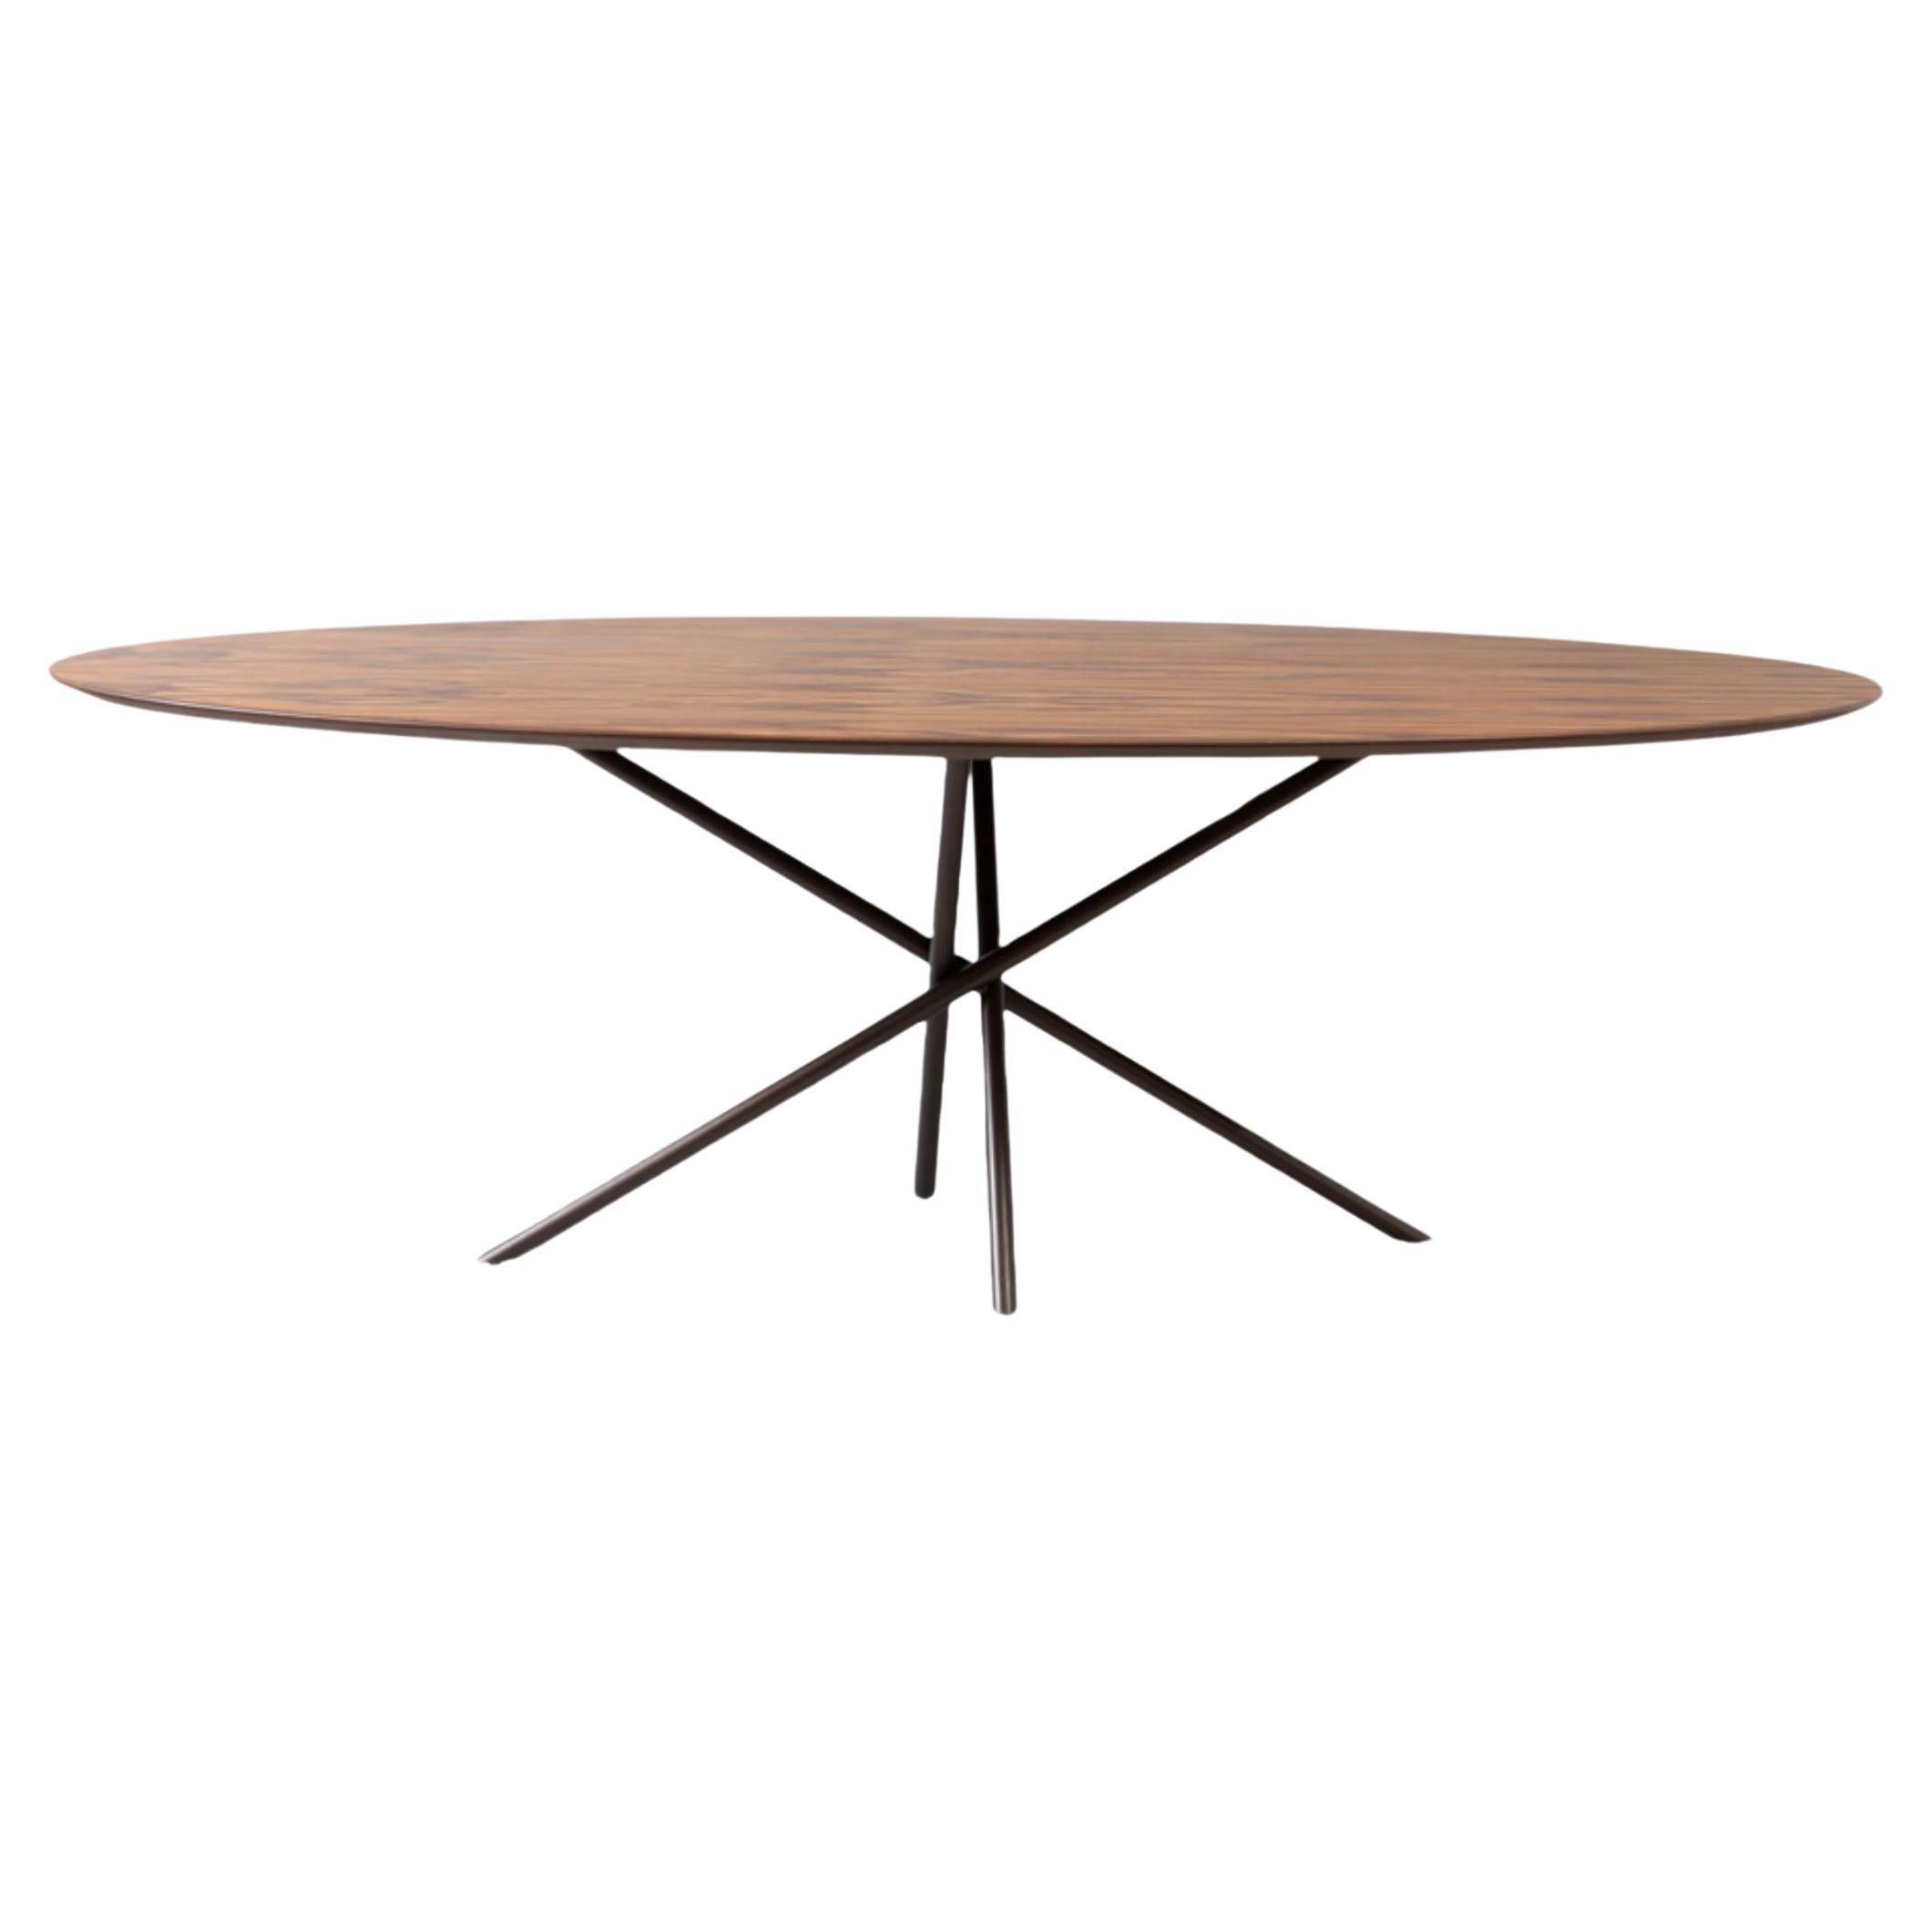 "Hastes" Oval Modernist Dining Table Black Steel and Pau Ferro Brazilian Wood For Sale